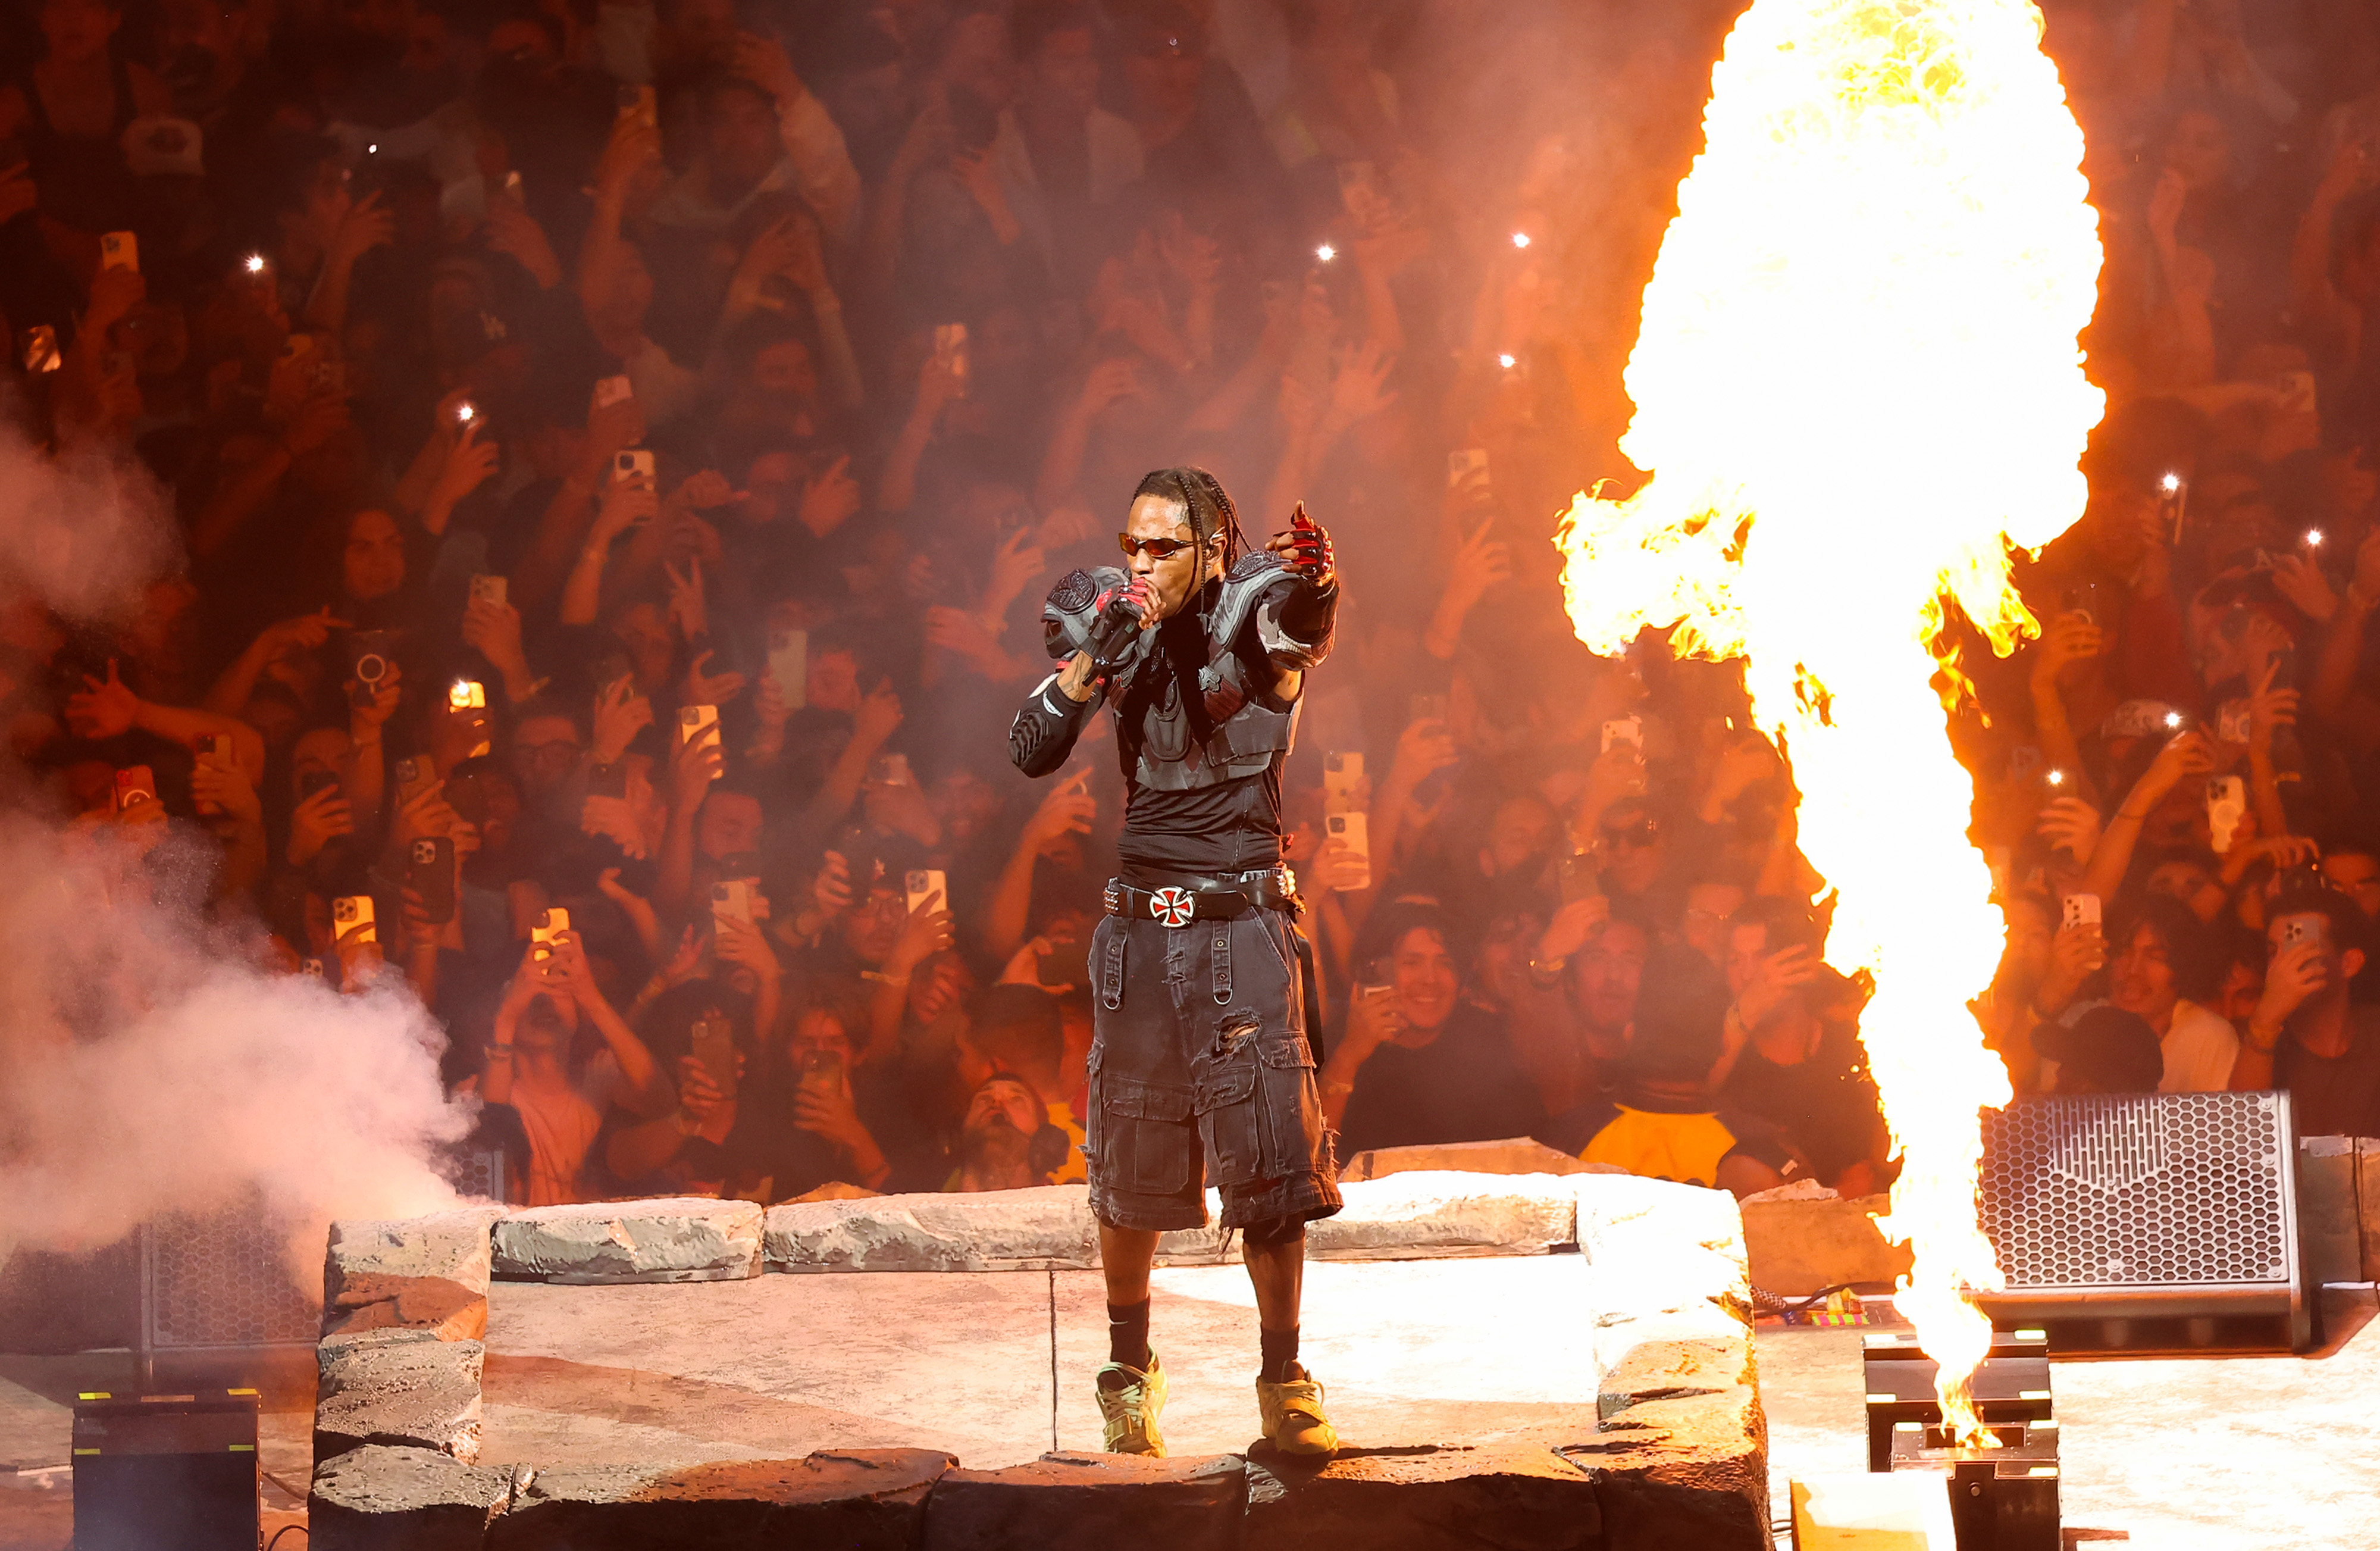 travis performing next to a blaze of fire on stage